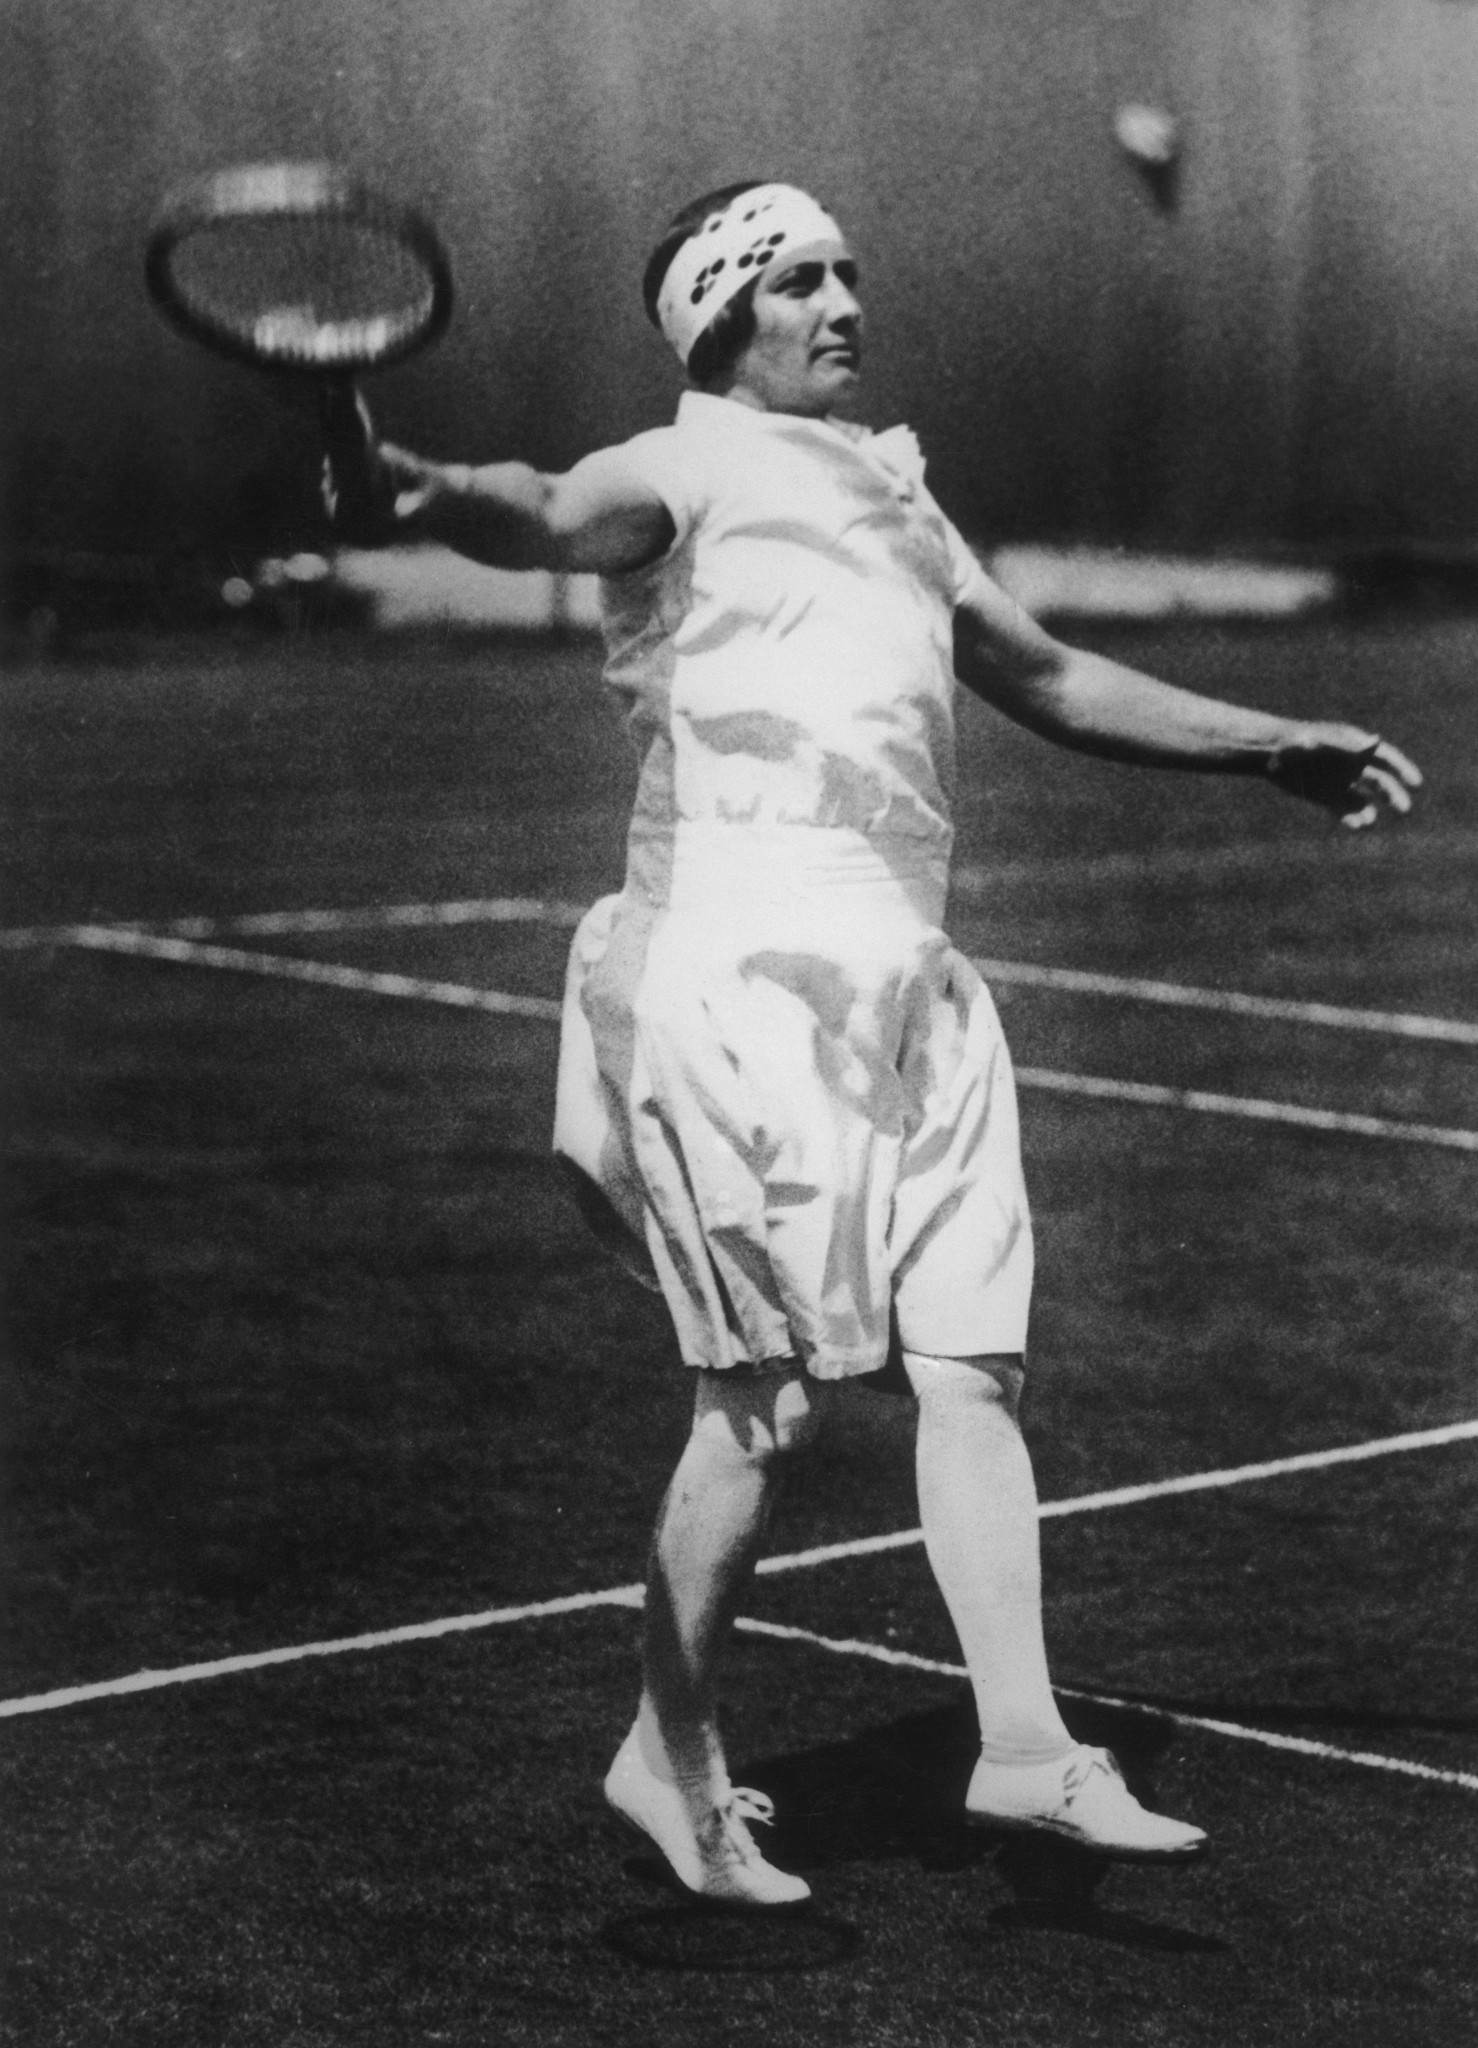 Hazel Hotchkiss Wightman was the Olympic mixed doubles with Richard Norris Williams in 1924 ©Getty Images